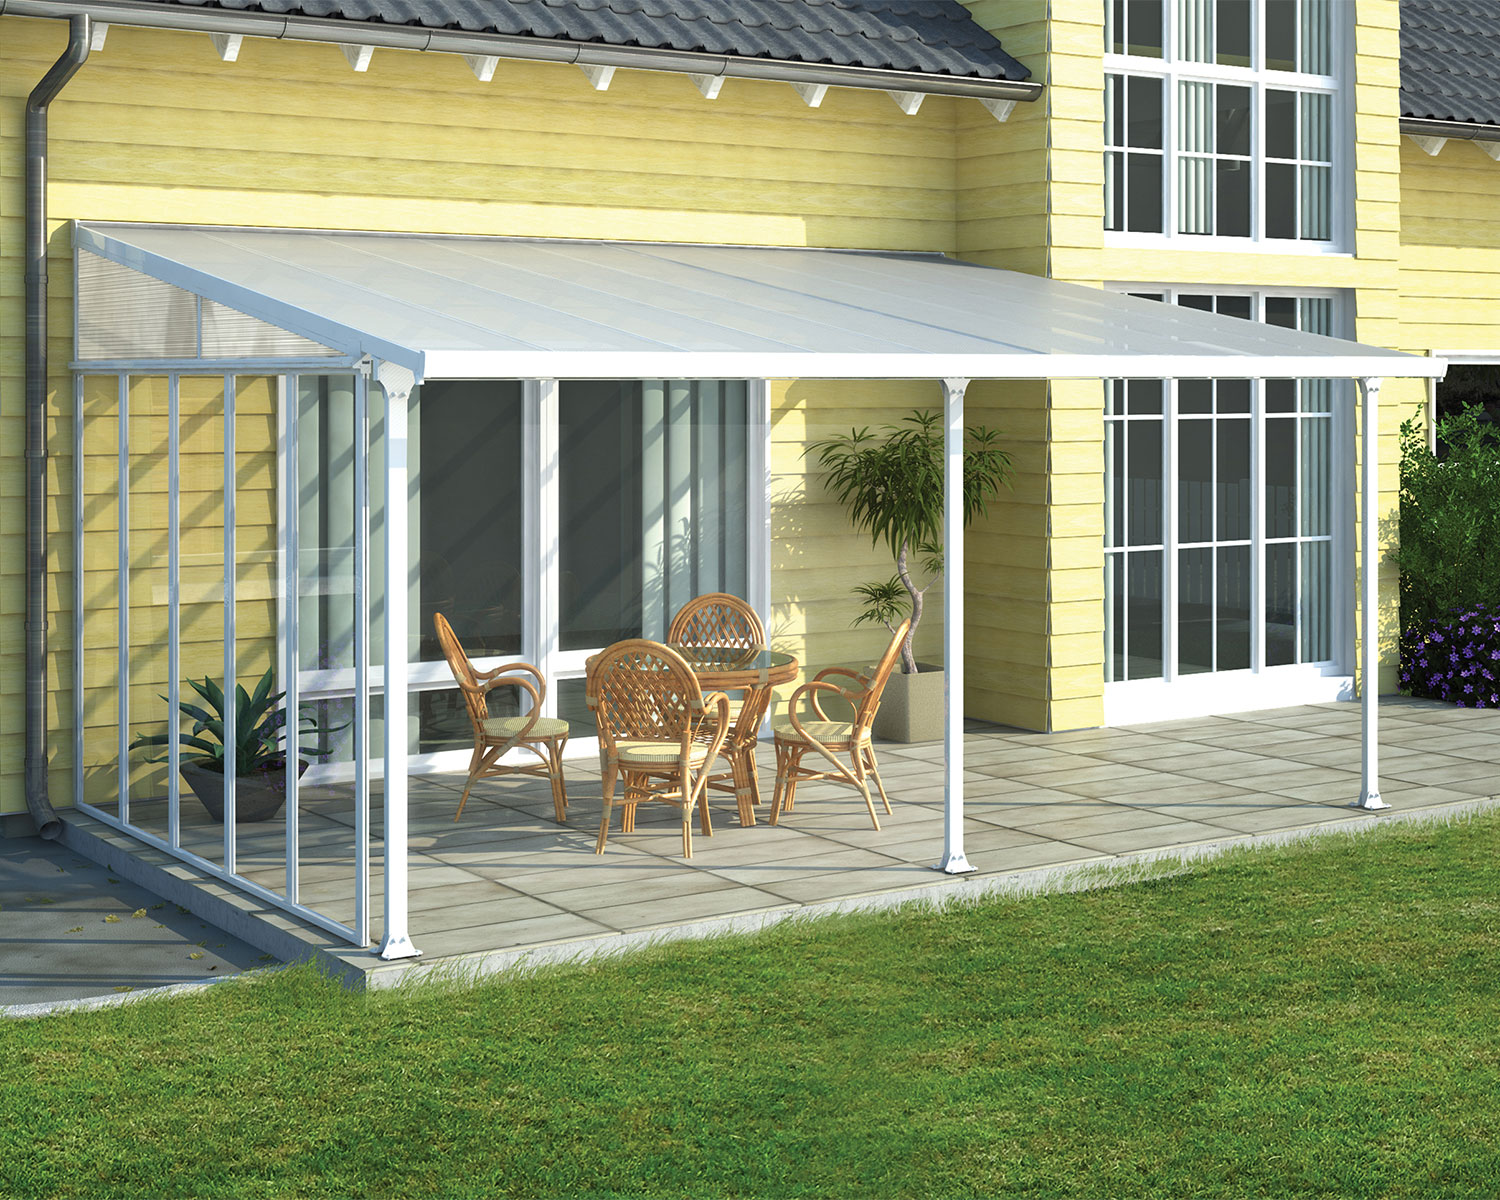 Aluminium White Patio Cover with polycarbonate side, Coverd patio furniture